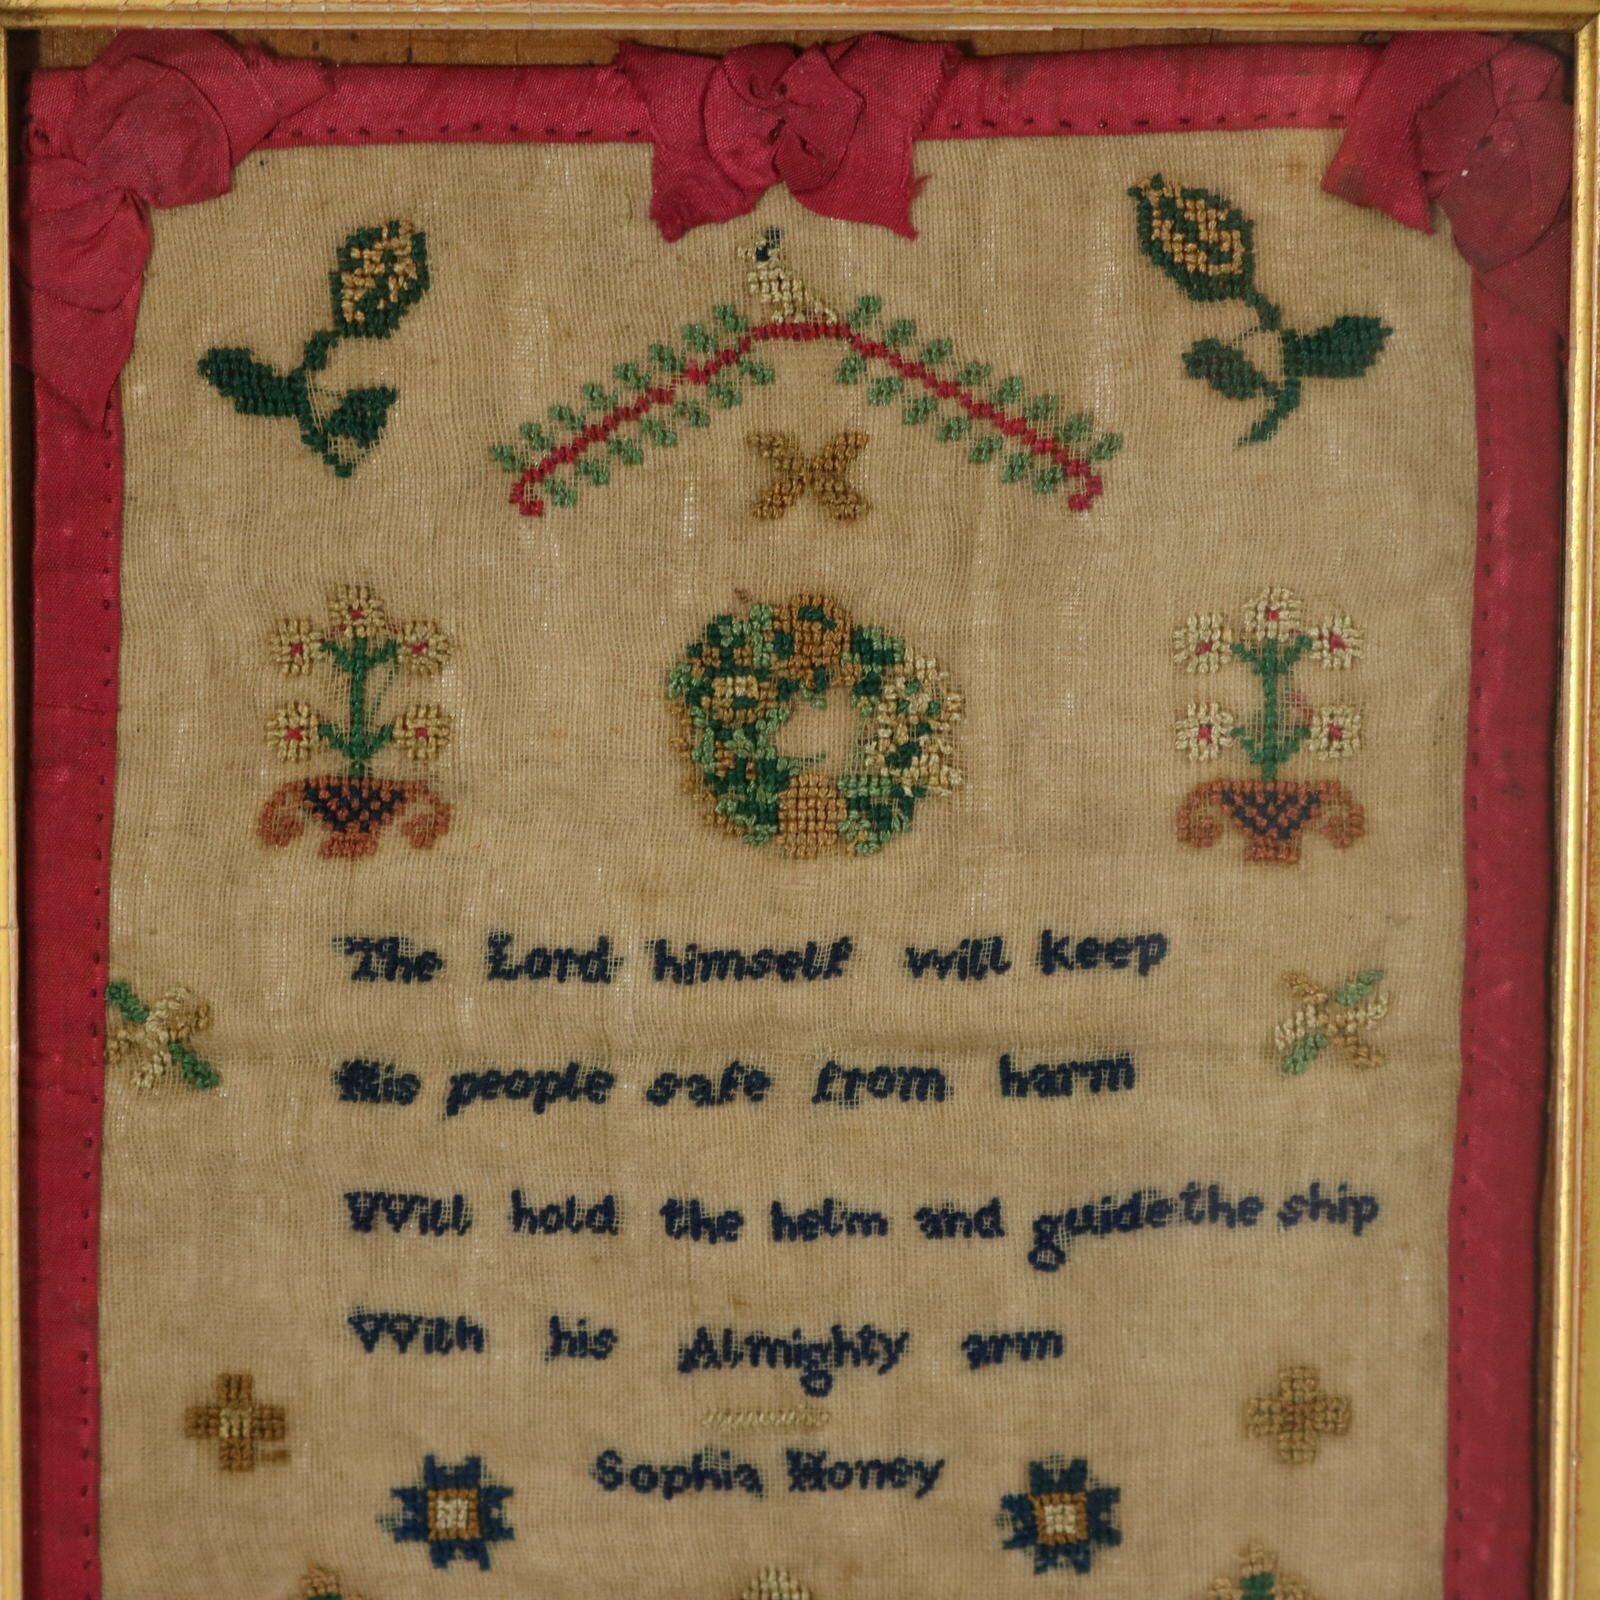 Georgian Miniature Sampler, circa 1800, by Sophia Honey. The sampler is worked in silk threads on a linen ground, in cross stitch throughout. Silk border with bows. Colours green, gold, silver, brown and red. Inscription reads, 'The Lord himself